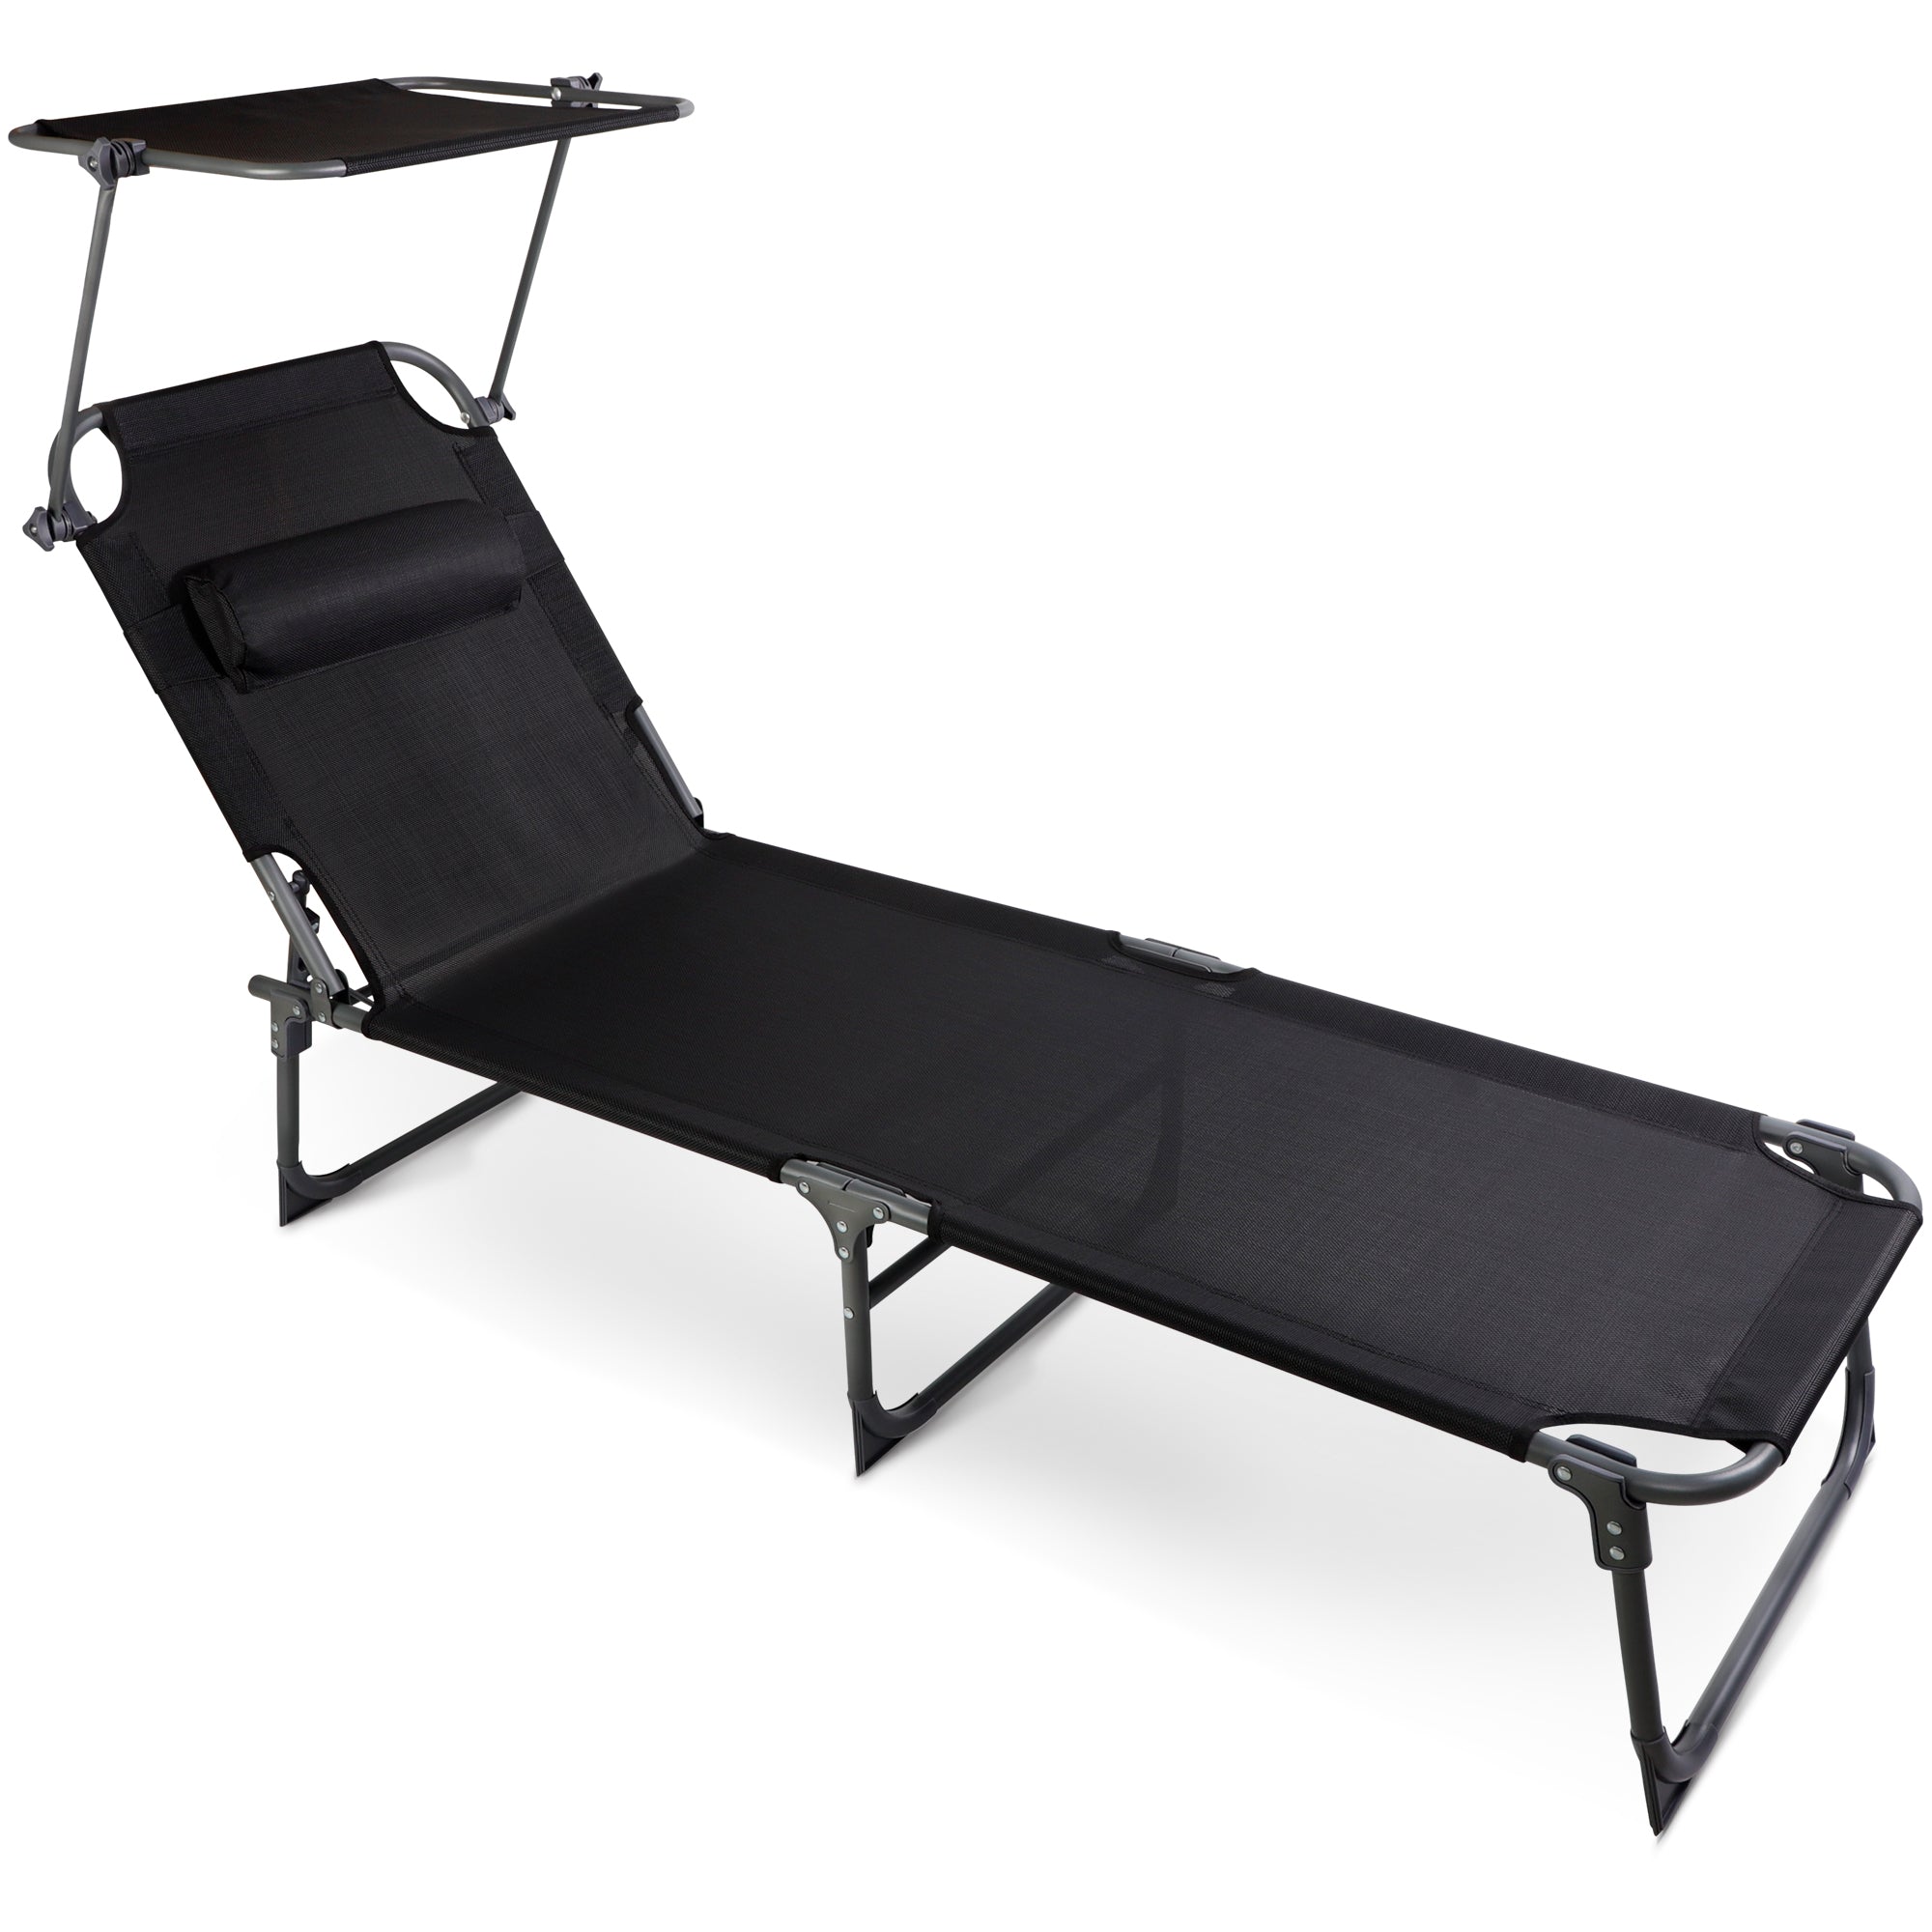 SUNMER Reclining Sun Lounger with Adjustable Backrest and Canopy